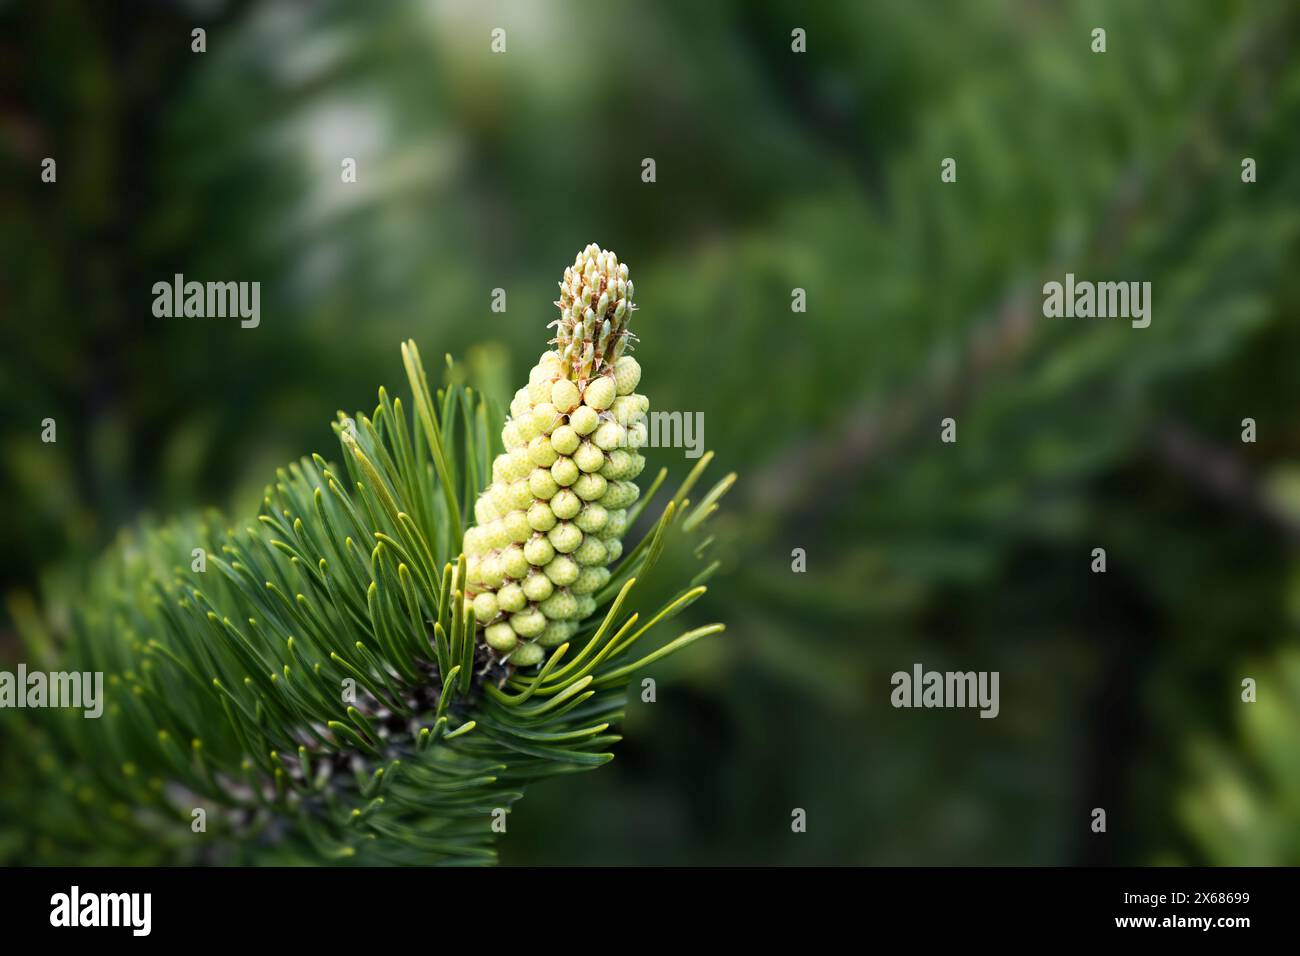 Blossom of Pinus mugo Turra. Male pollen producing strobili. New shoots in spring of dwarf mountain pine. Conifer cone. Cluster pollen-bearing male Stock Photo